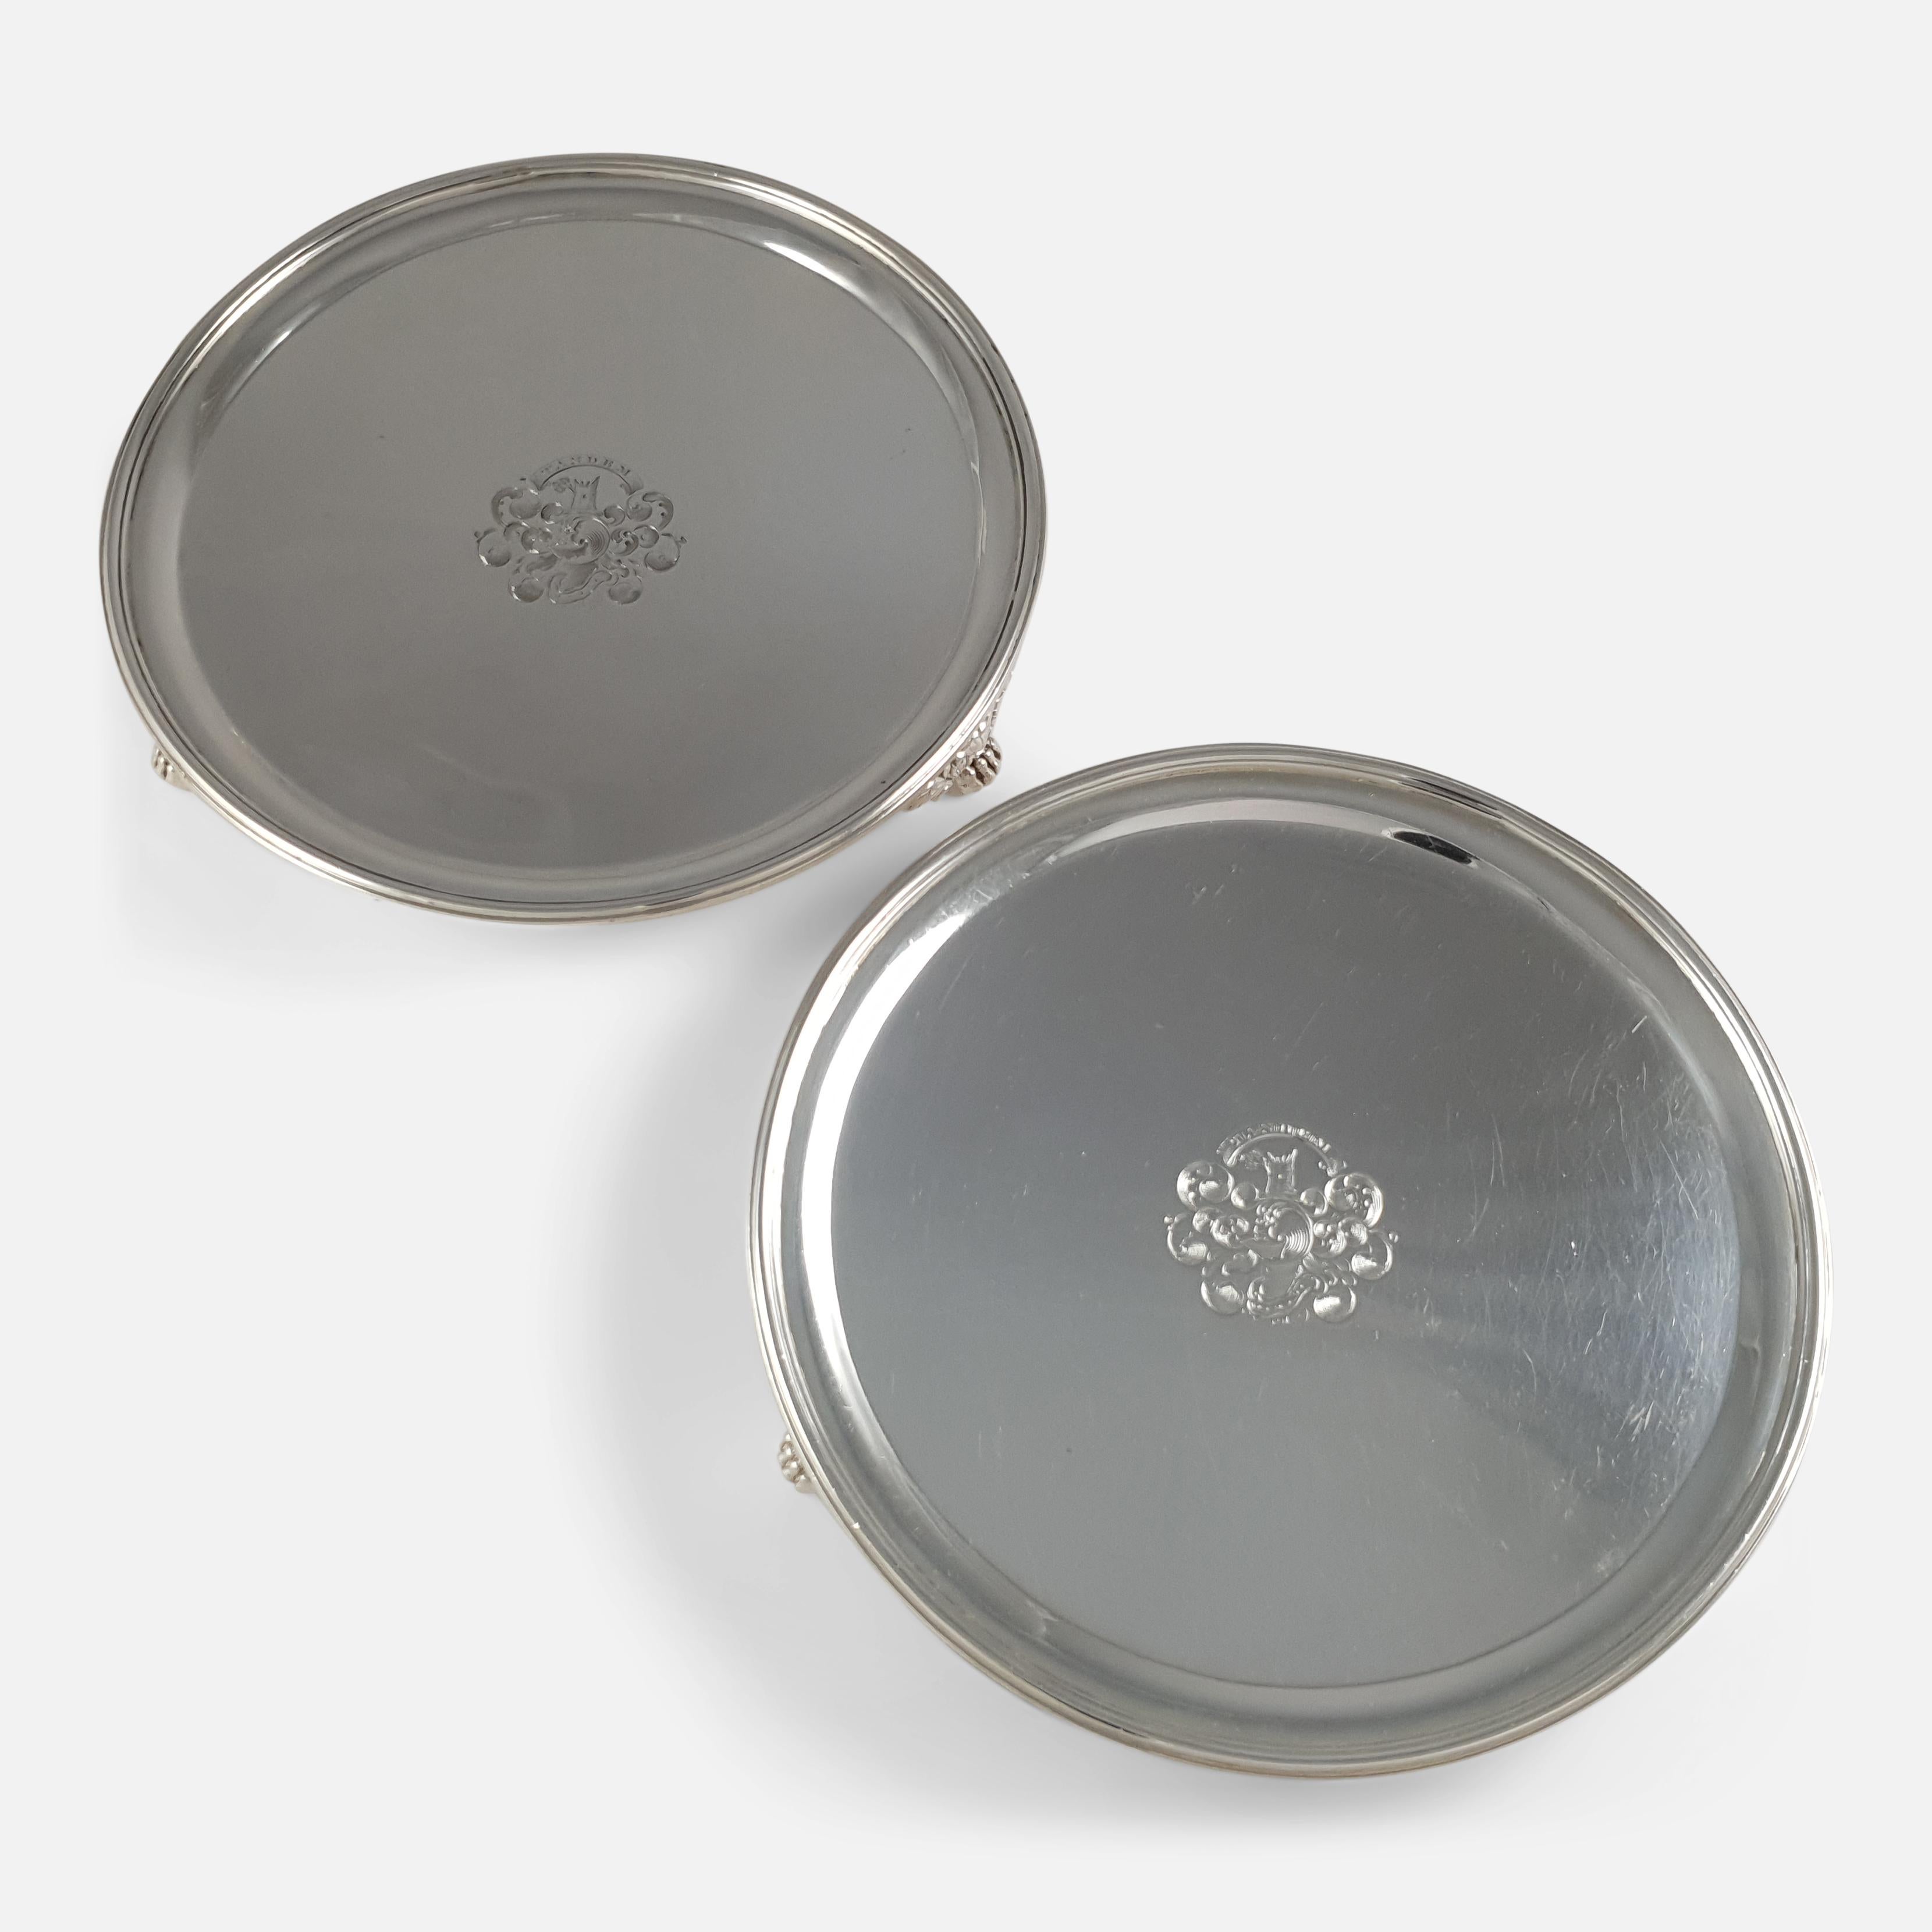 A pair of Scottish George III sterling silver salvers by John McKay, Edinburgh, 1818. The salvers are of plain circular form with a reeded rim, on three paw feet, with the McVicar crested coat-of-arms. The hallmarks are located to the reverse with